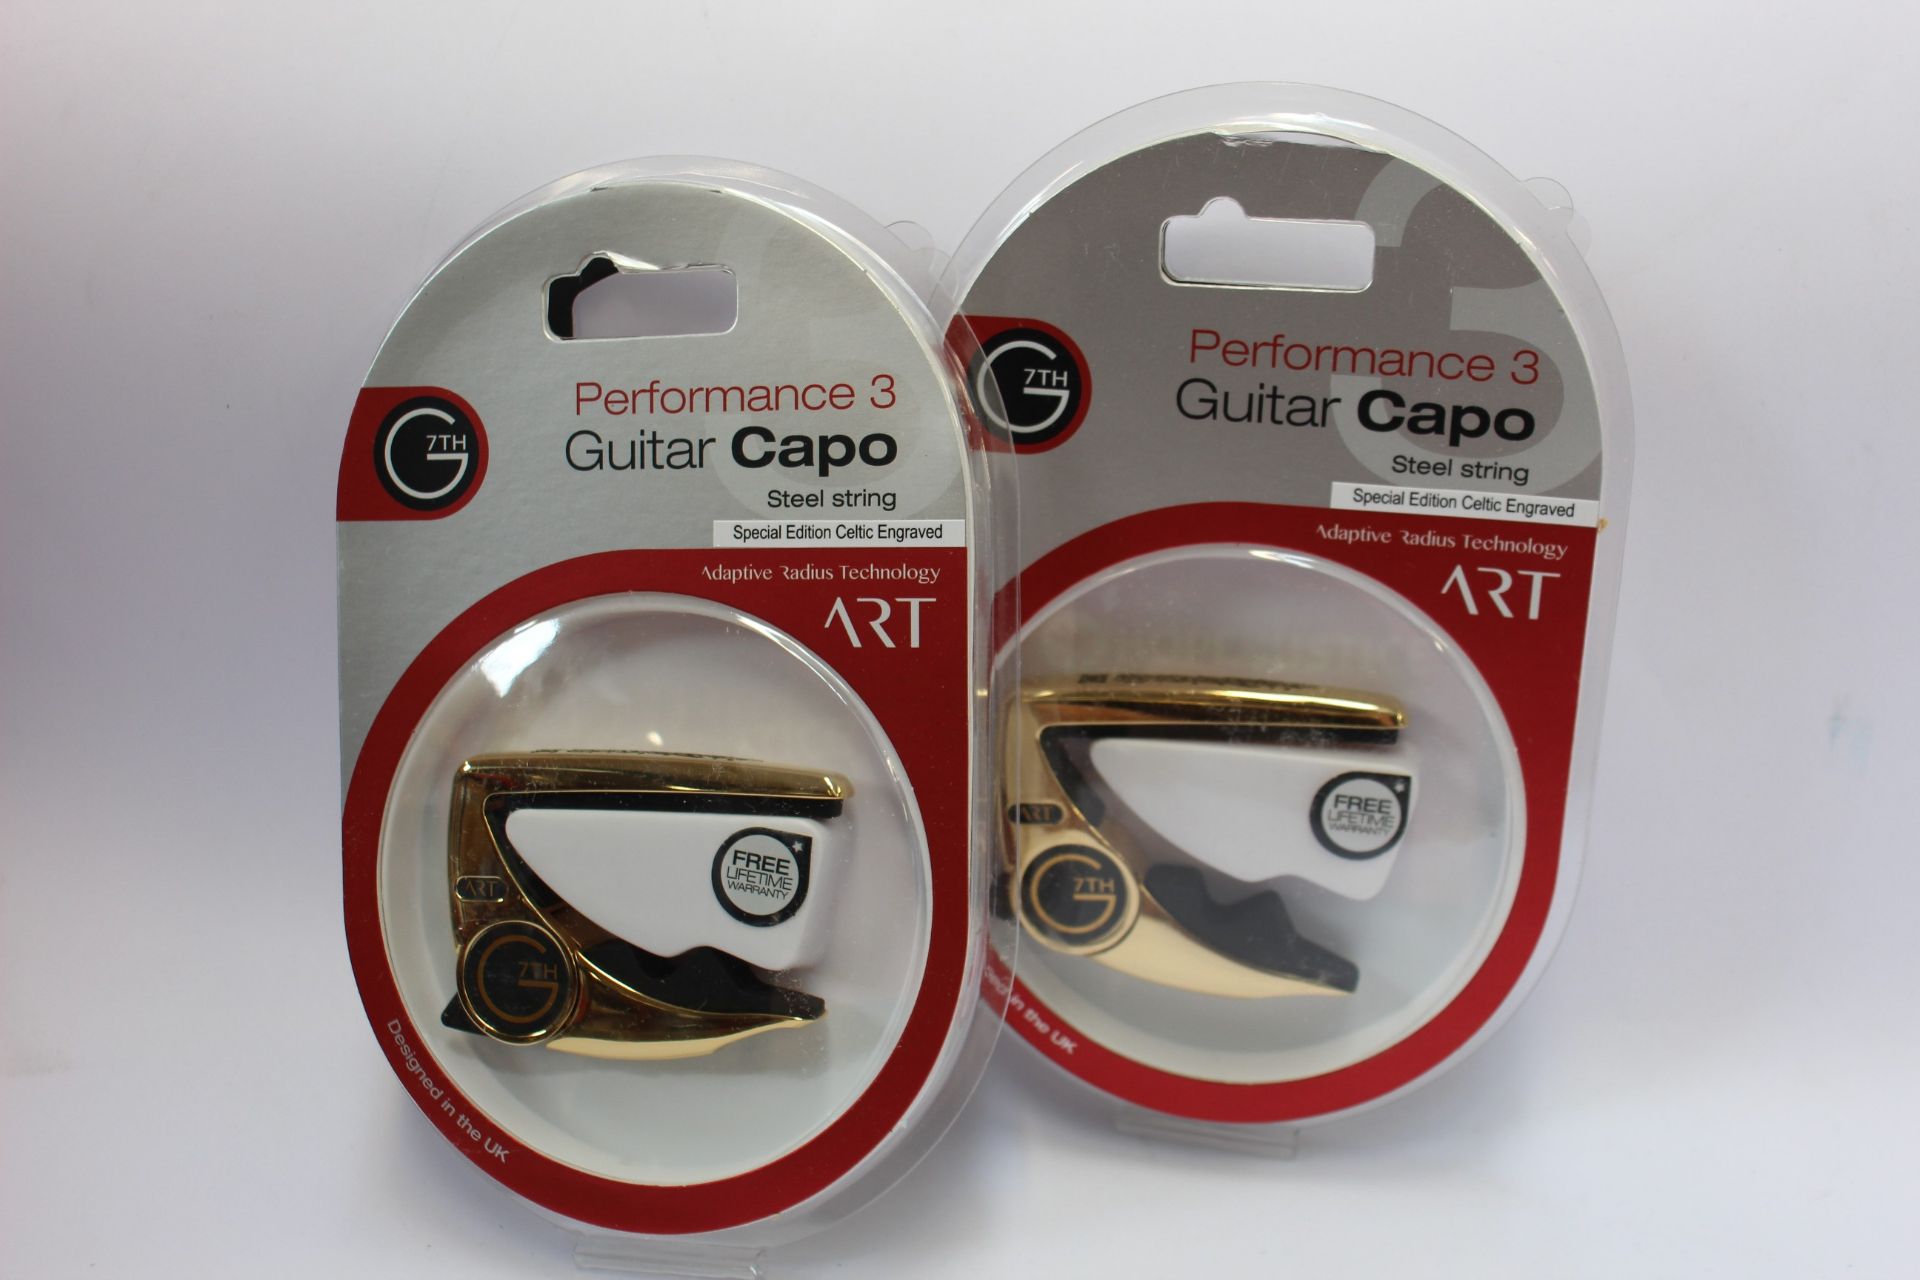 Three as new G7th Performance 3 Guitar Capos for steel strings (Special Edition Celtic Engraved).